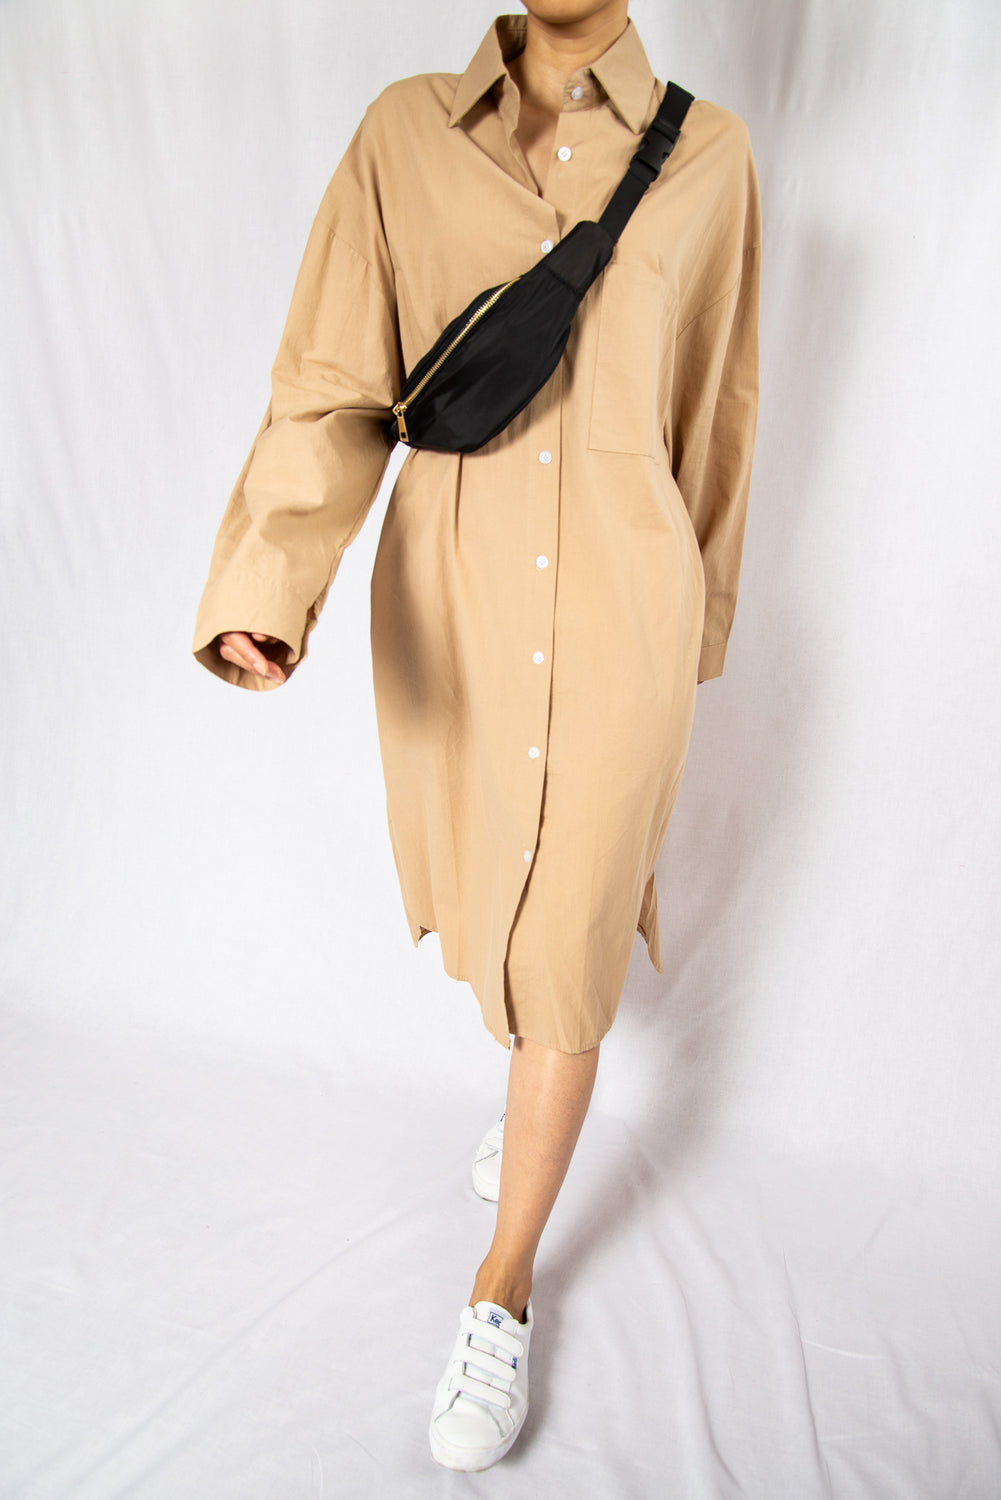 MODZ Beige Loose Midi Shirt Dress with Long Sleeves Modest Oversized Knee-Length Collared Dress in 100% Cotton